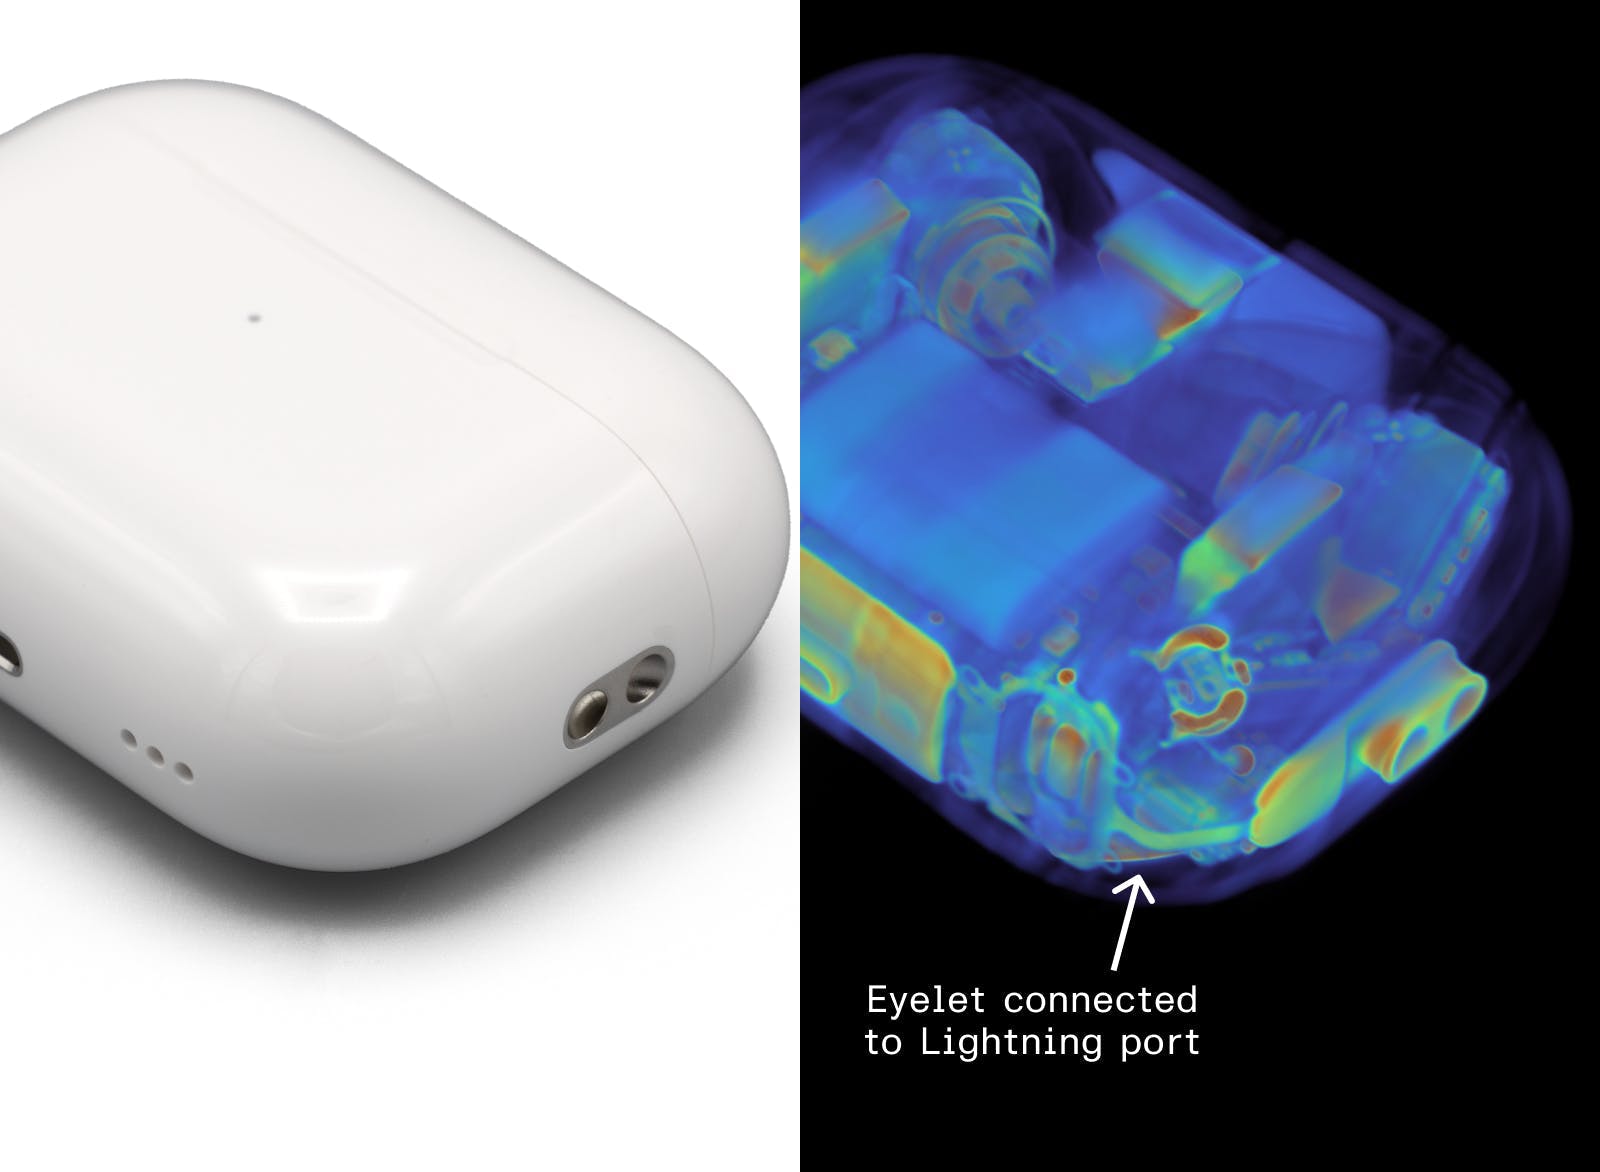 CT scan of the AirPod Pro 2 charging case showing the lanyard loop internally connected to the Lightning port